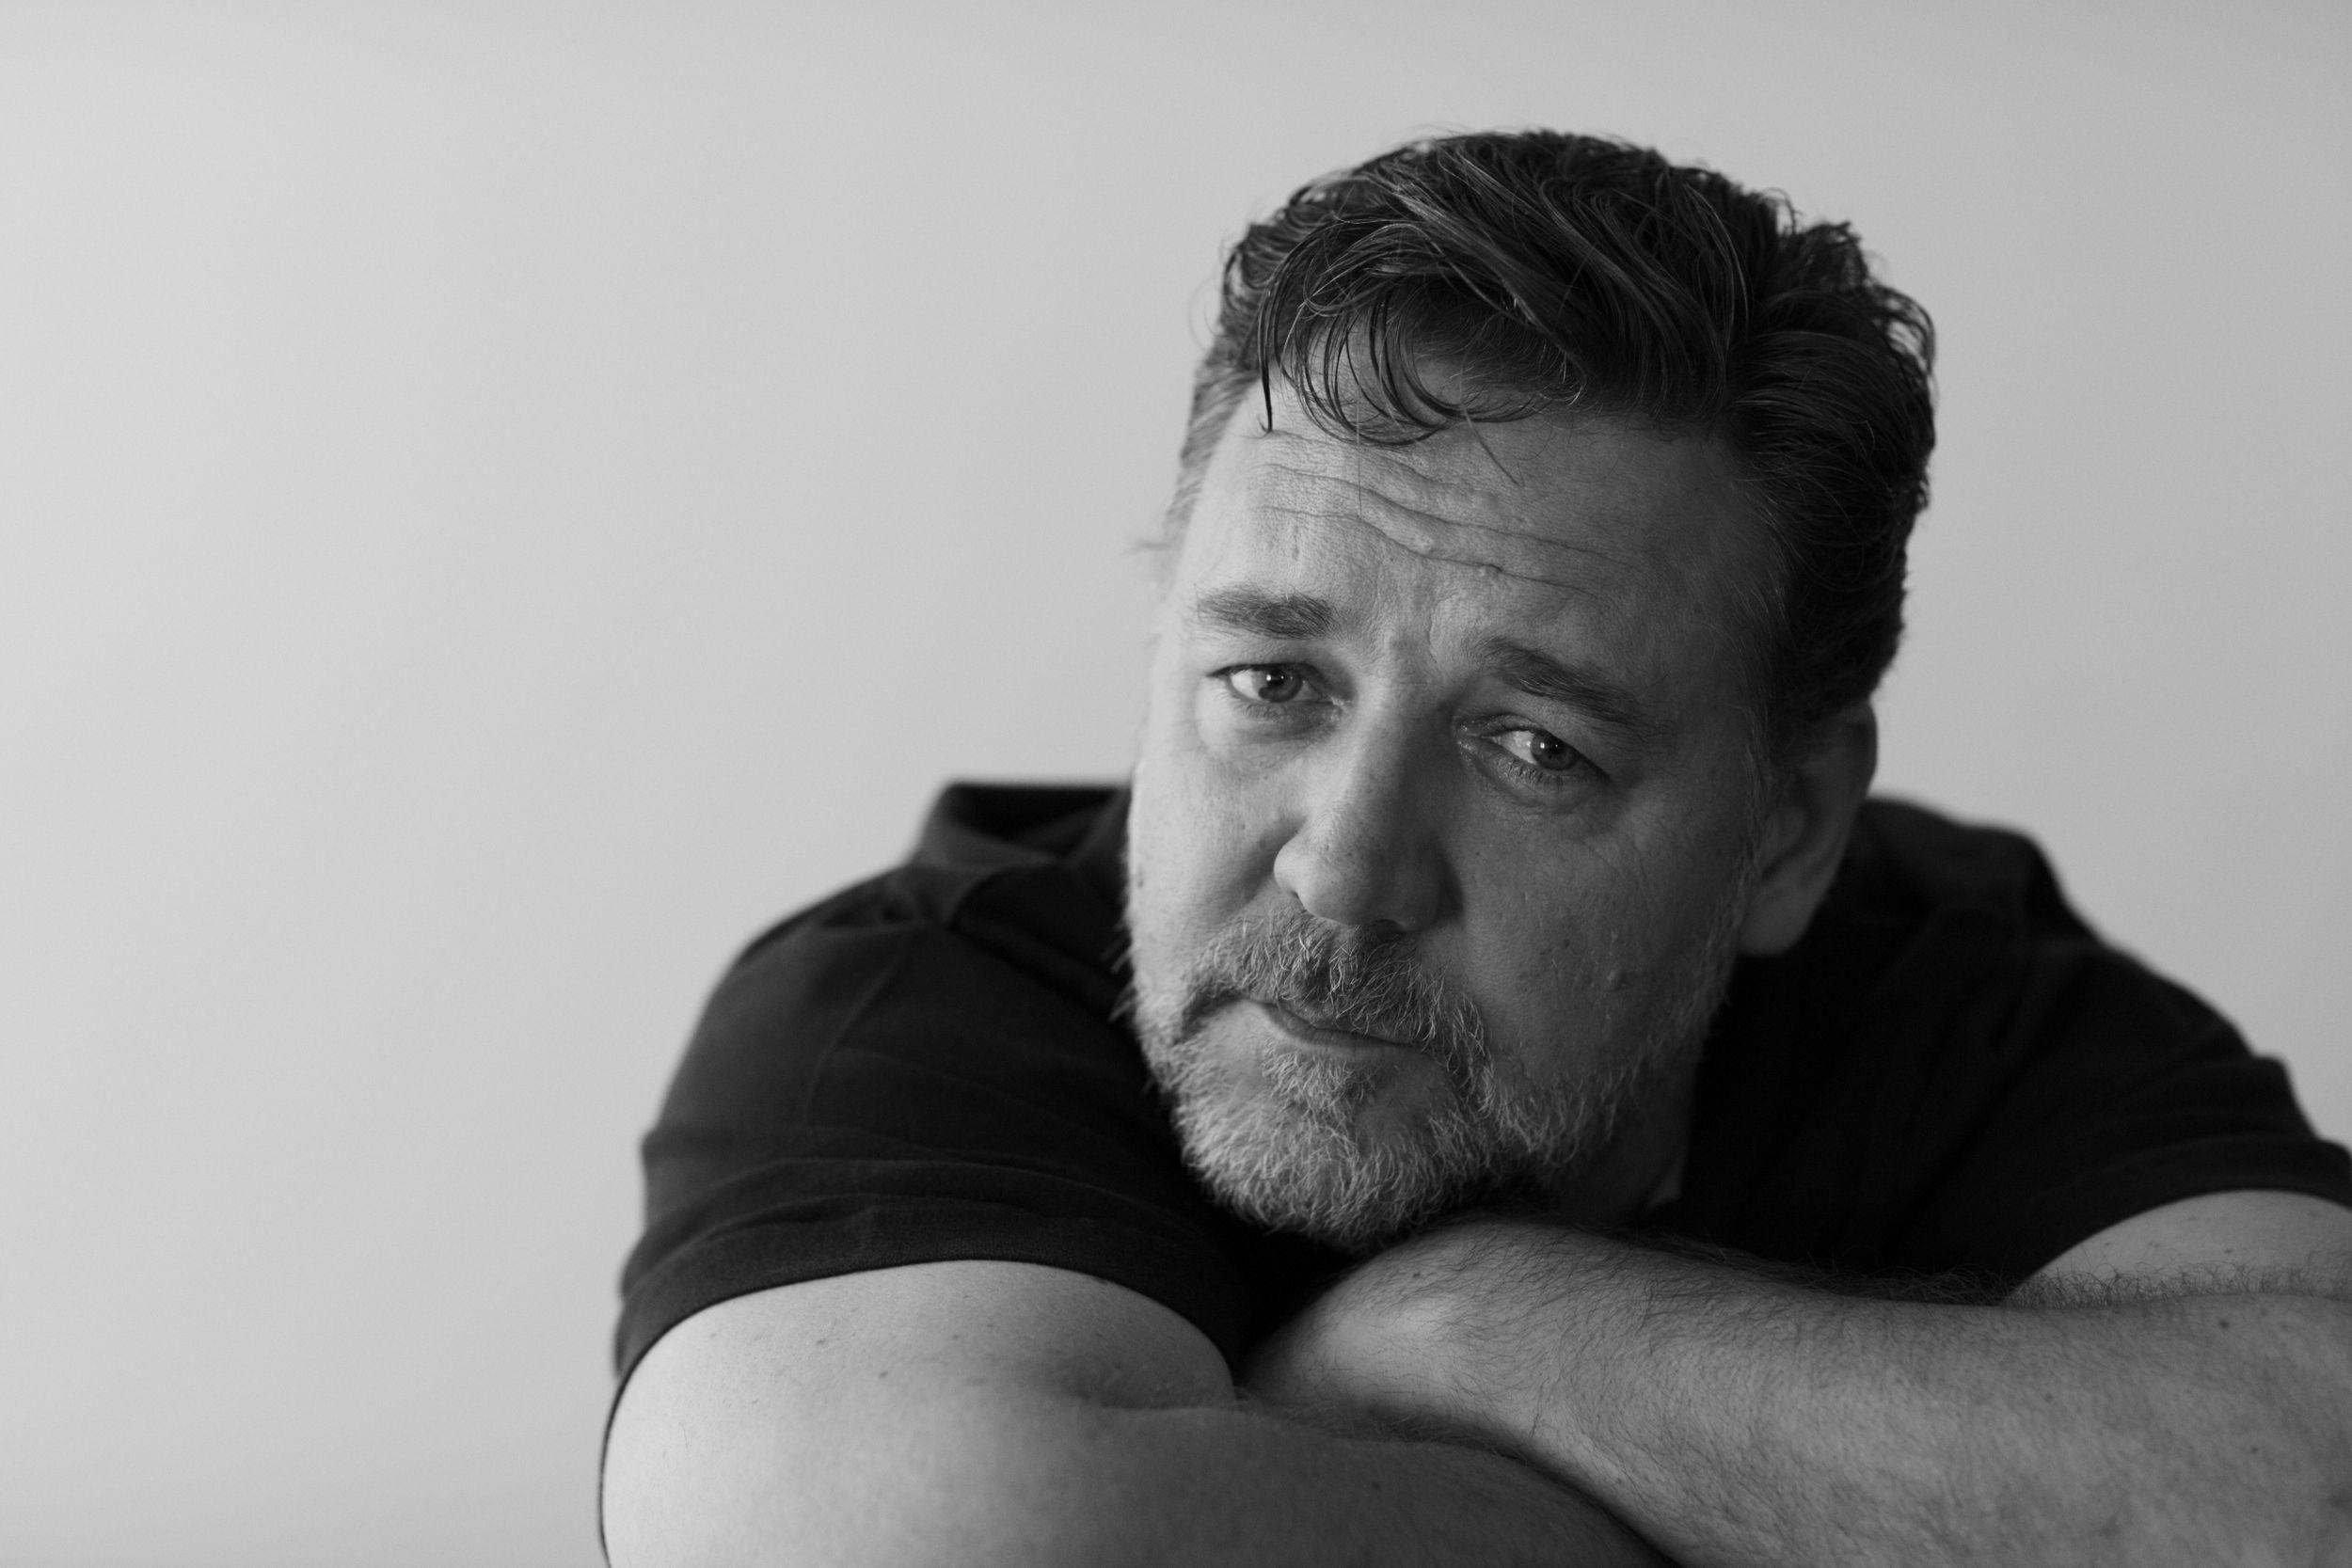 Russell Crowe Wallpaper Image Photo Picture Background